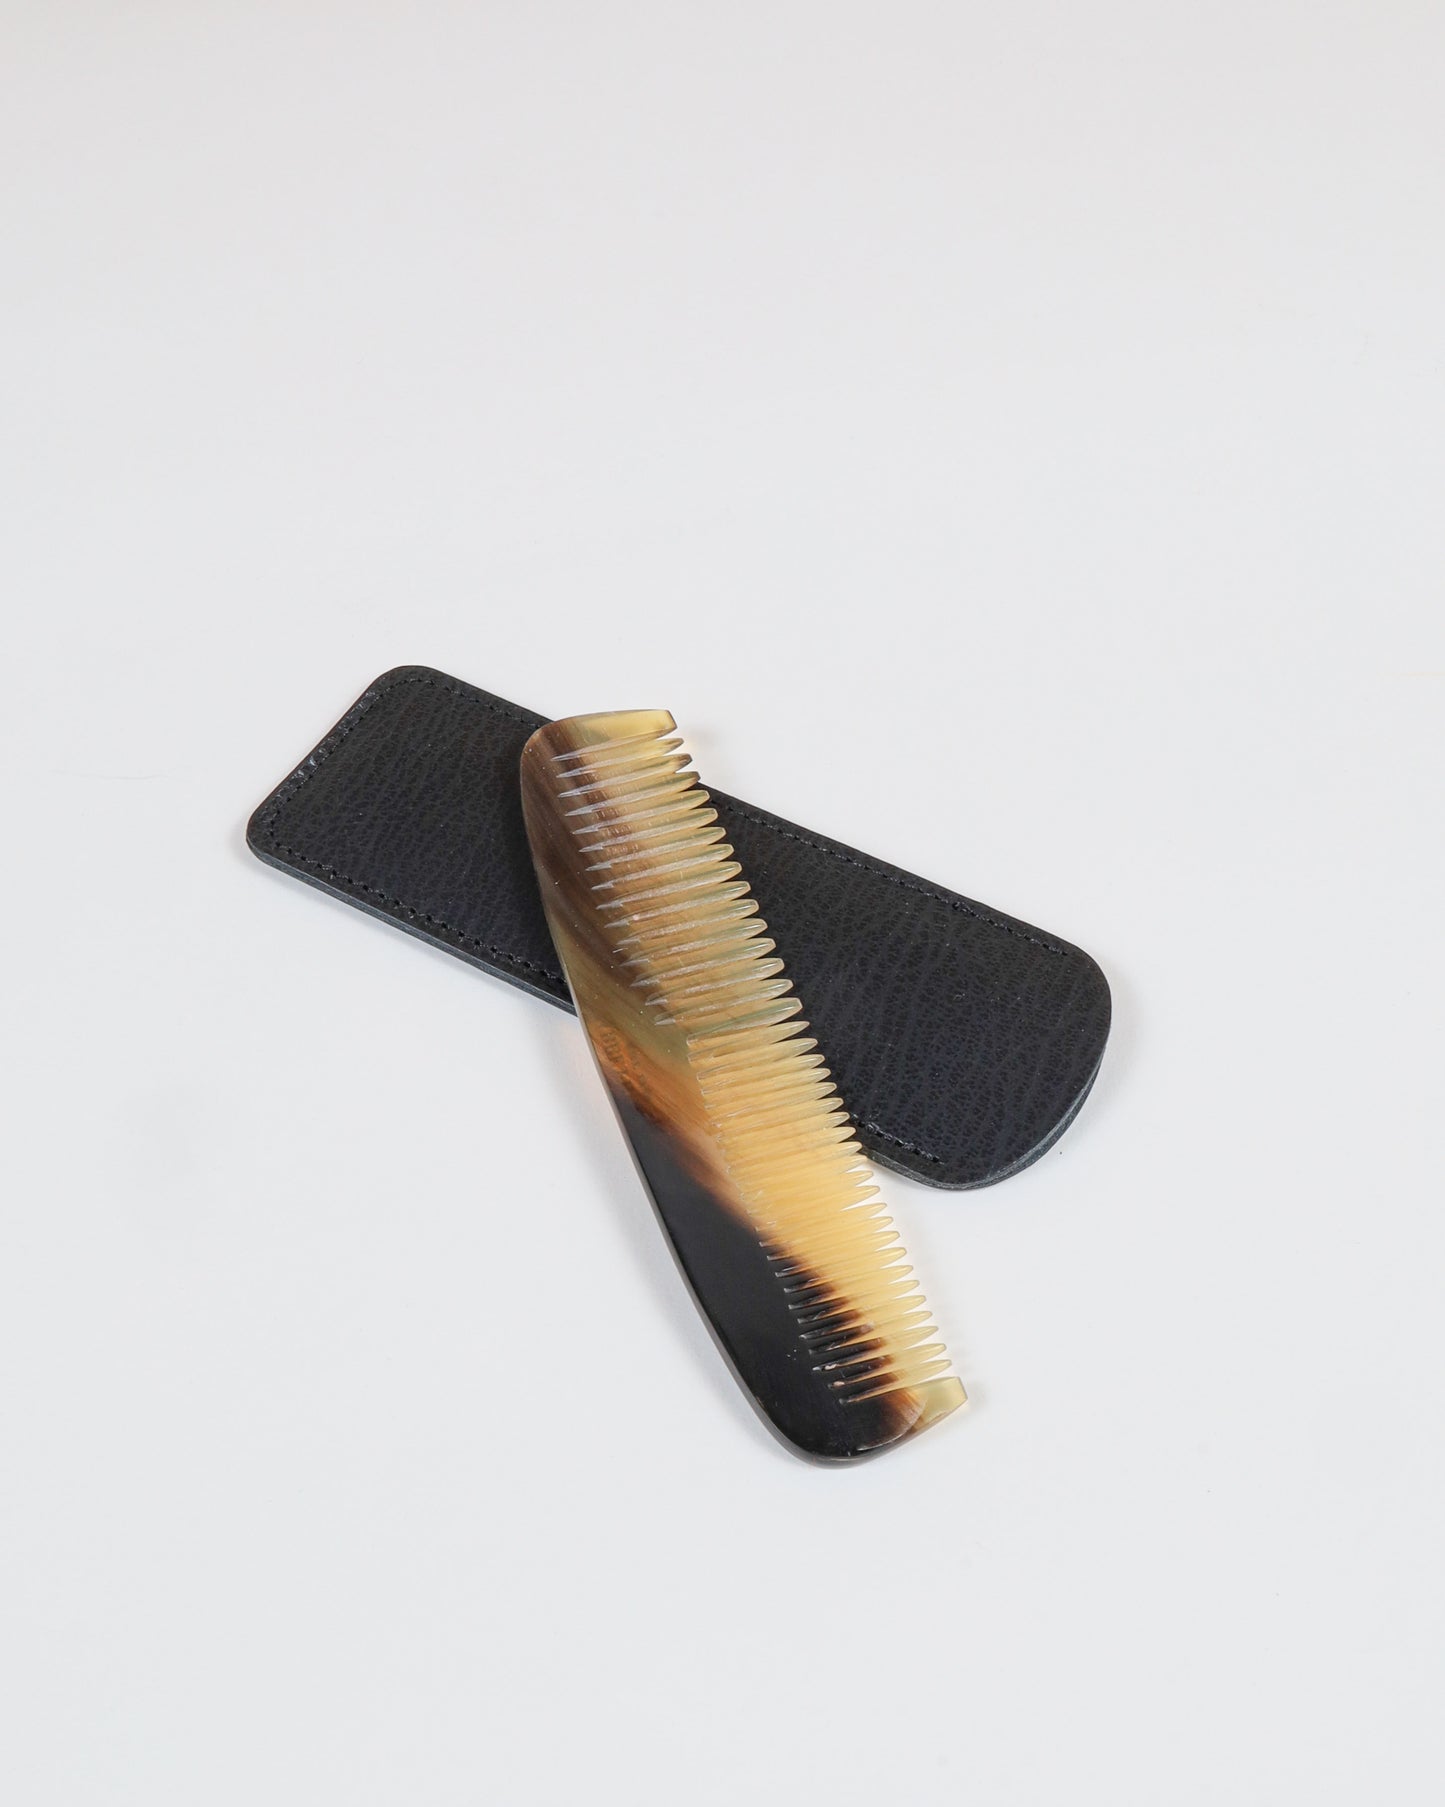 5" Pocket Comb with Leather Case